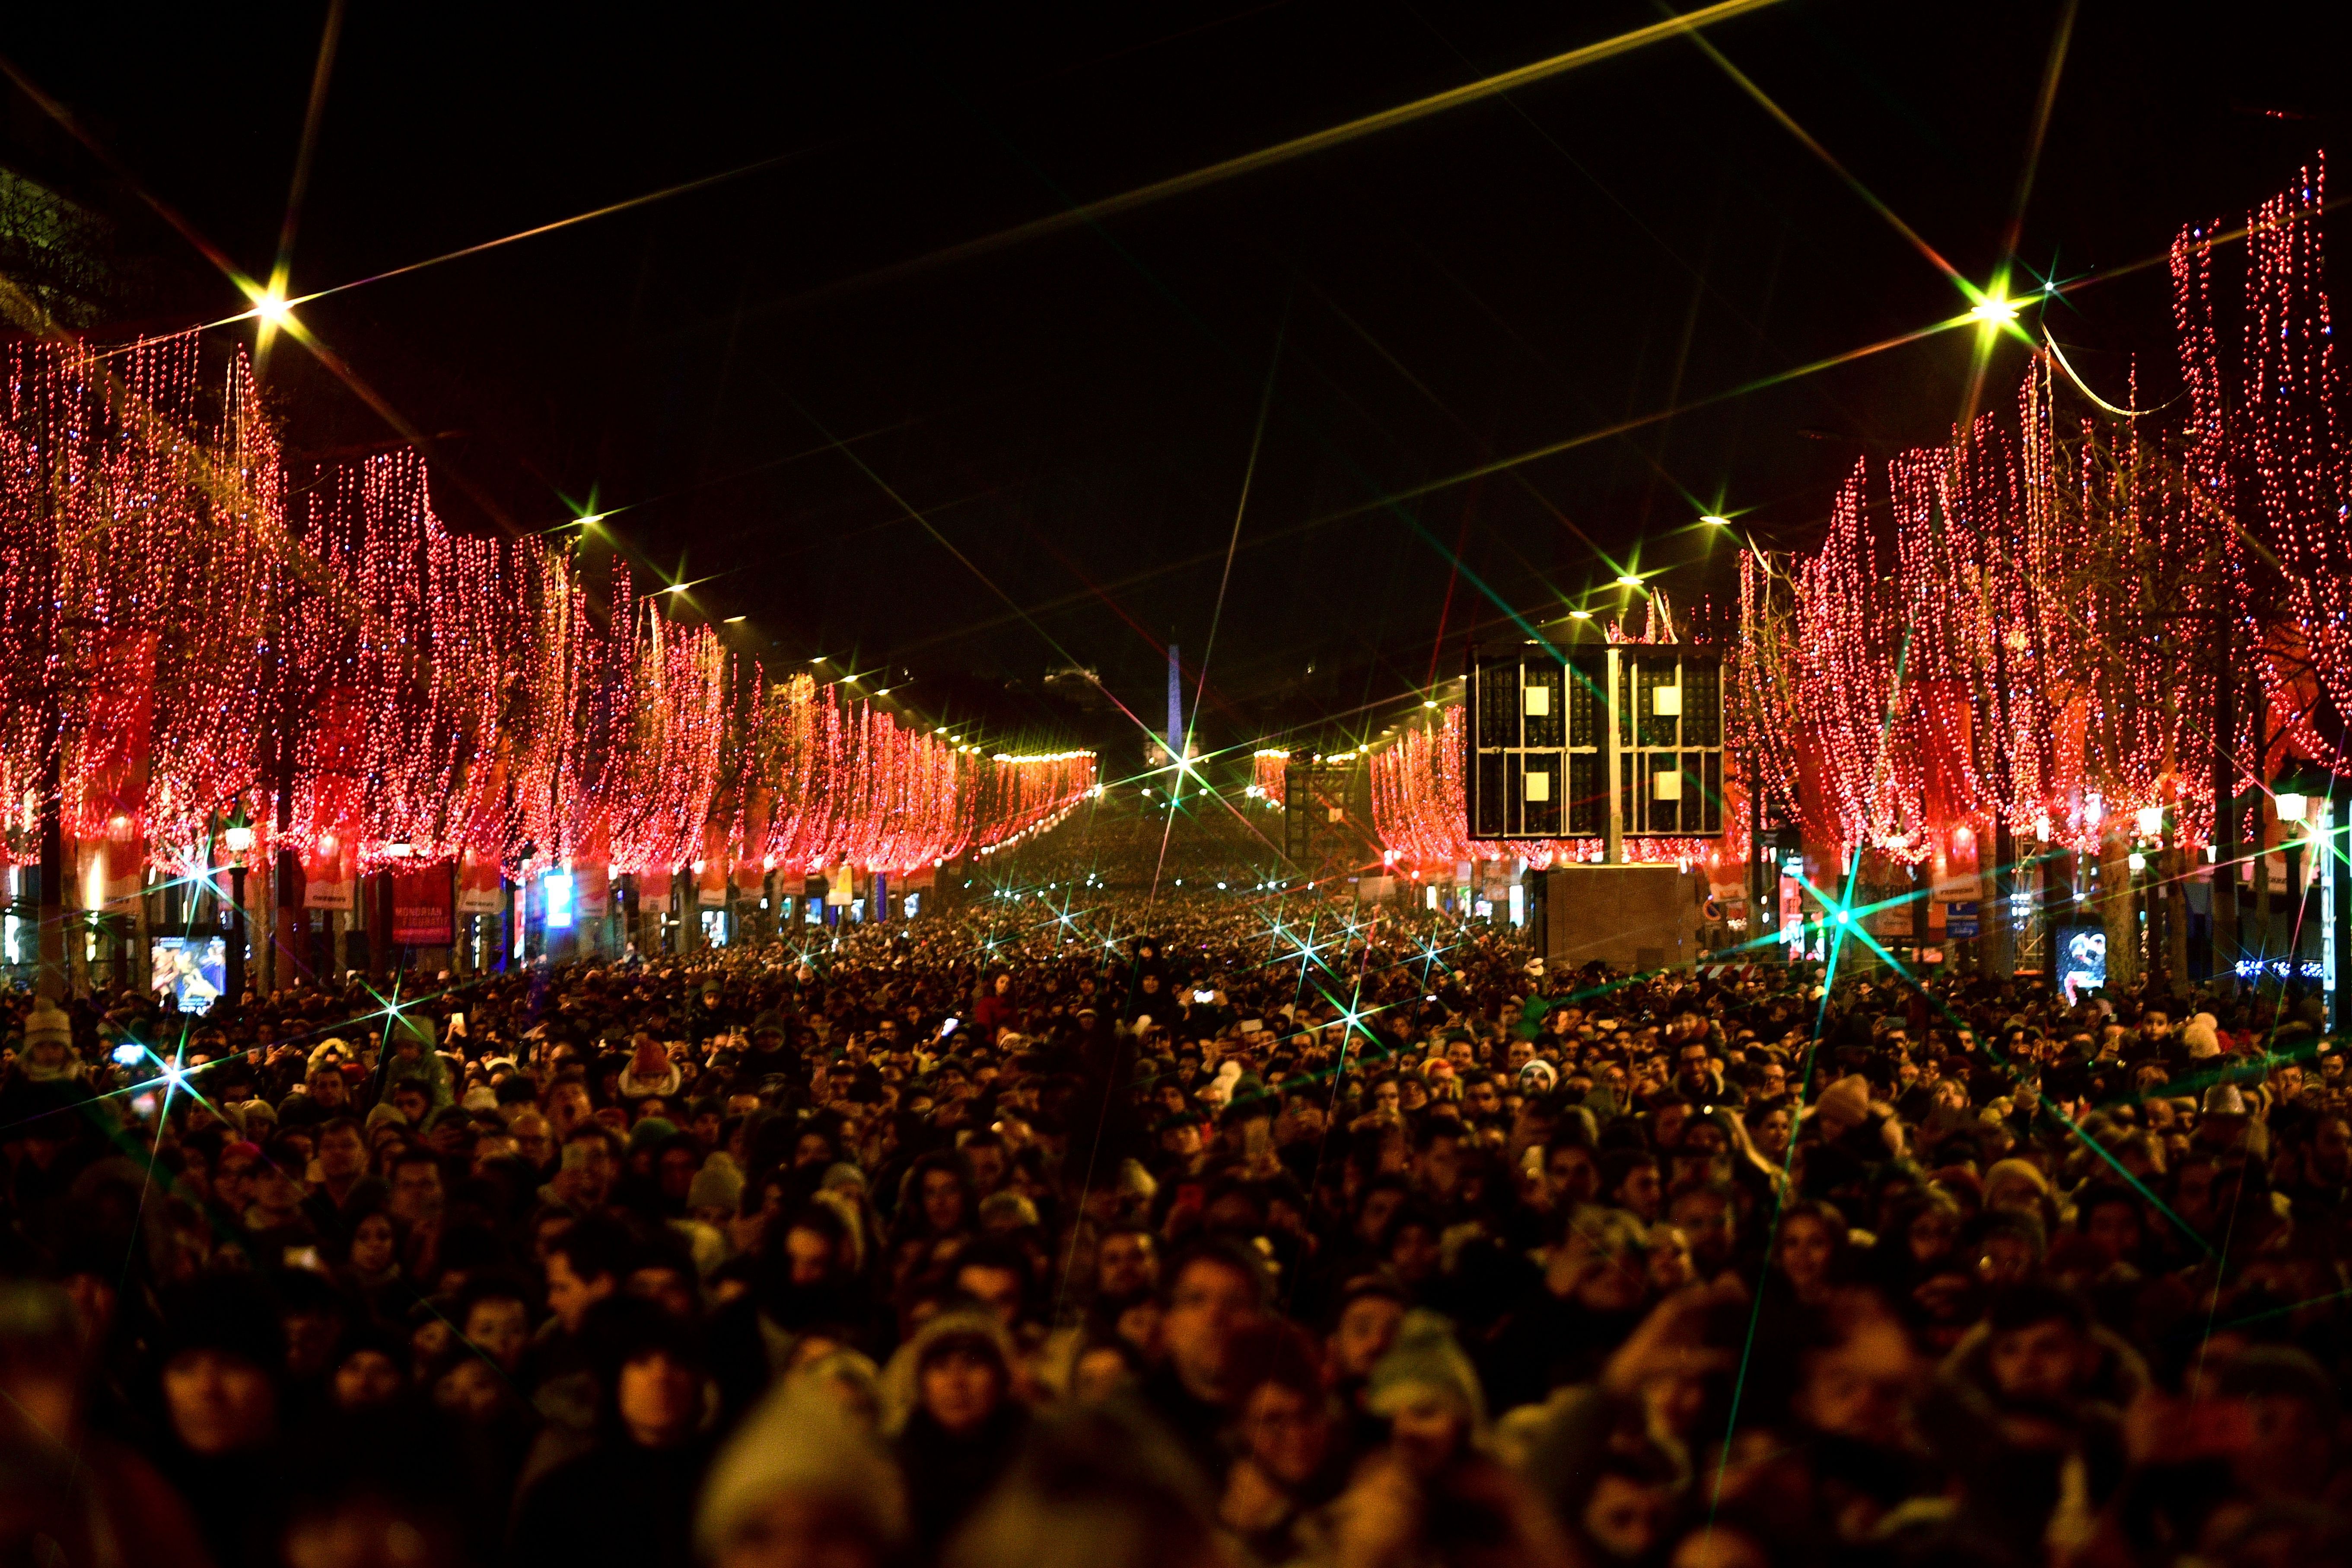 A crowd waits for the new year's eve fireworks at the Champs Elysees in Paris on December 31,